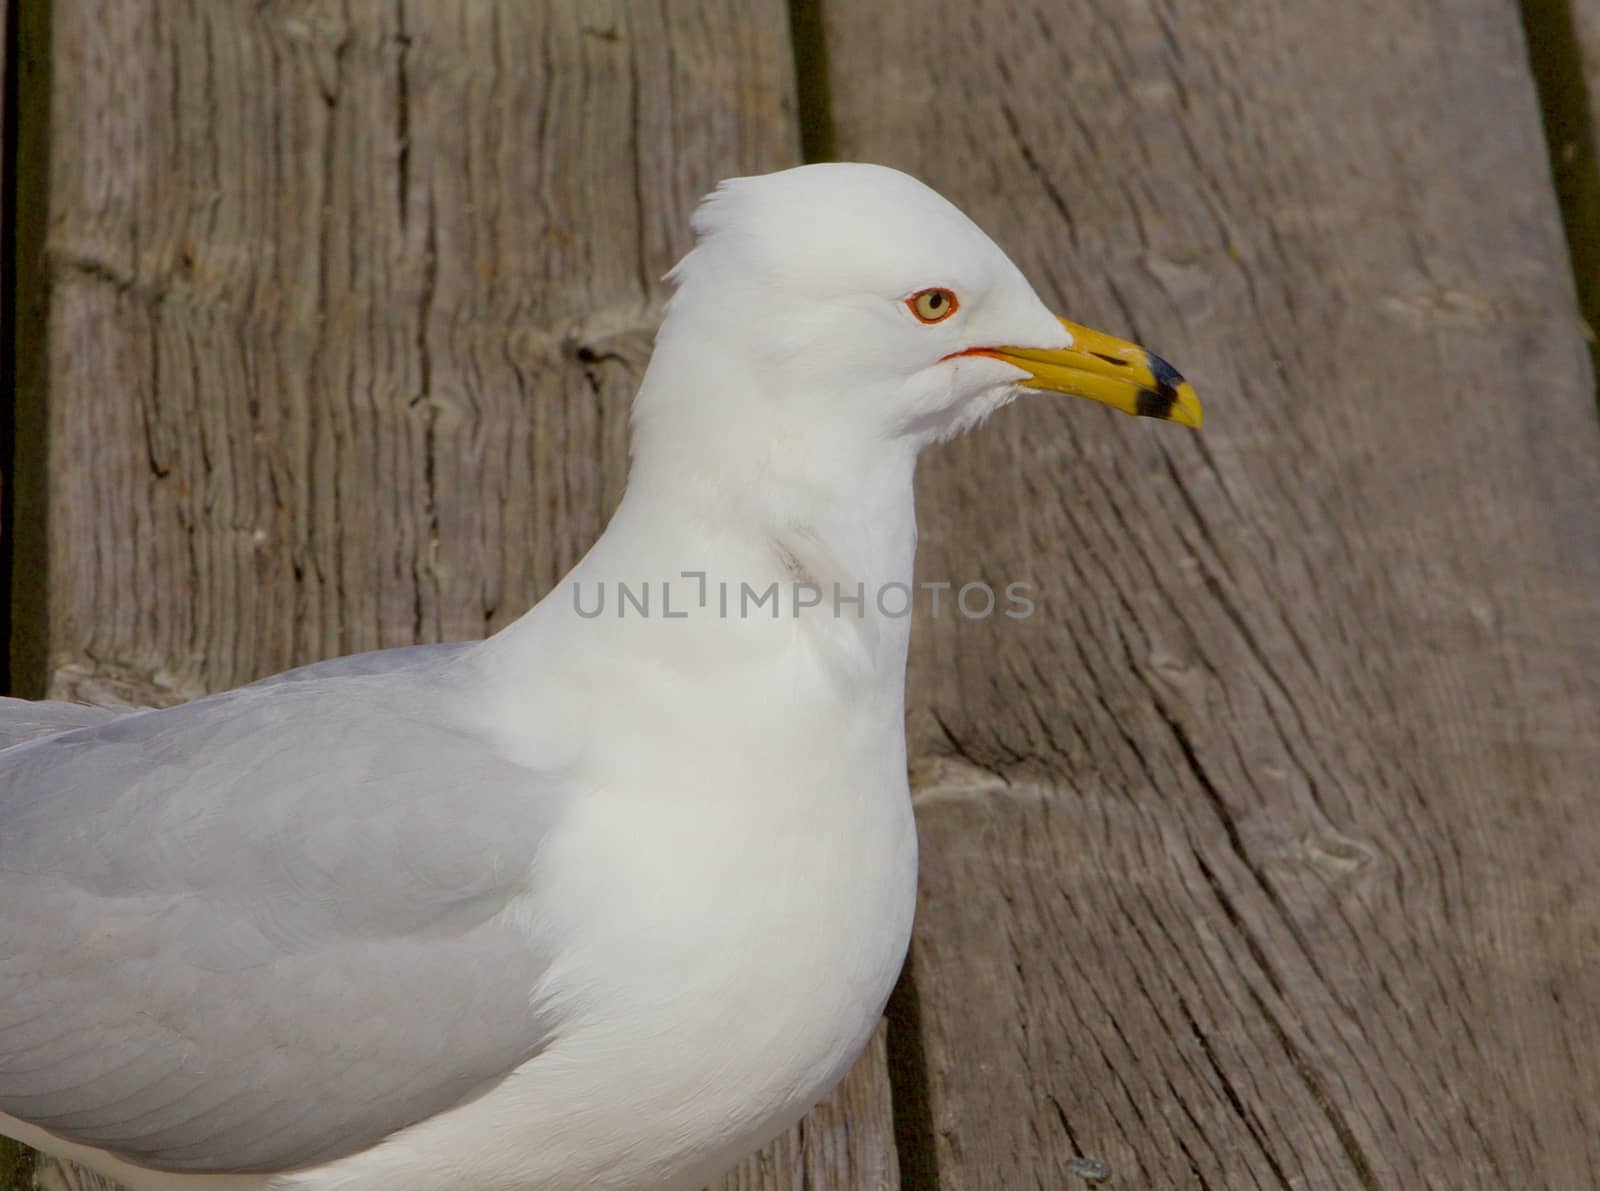 The ring-billed gull's portrait by teo